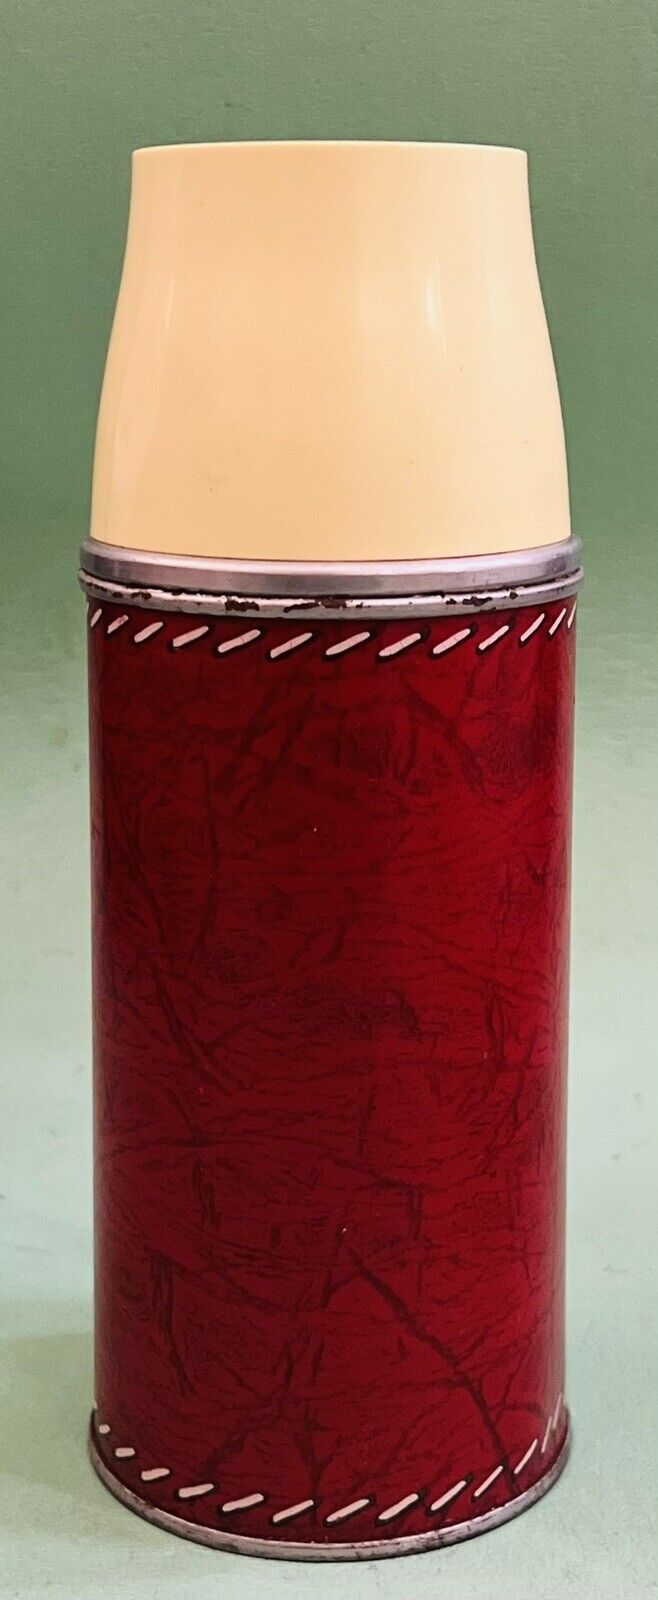 Vintage 1950's Thermos Brand Vaccum Bottle Model 3153 Faux Stitched Red Leather